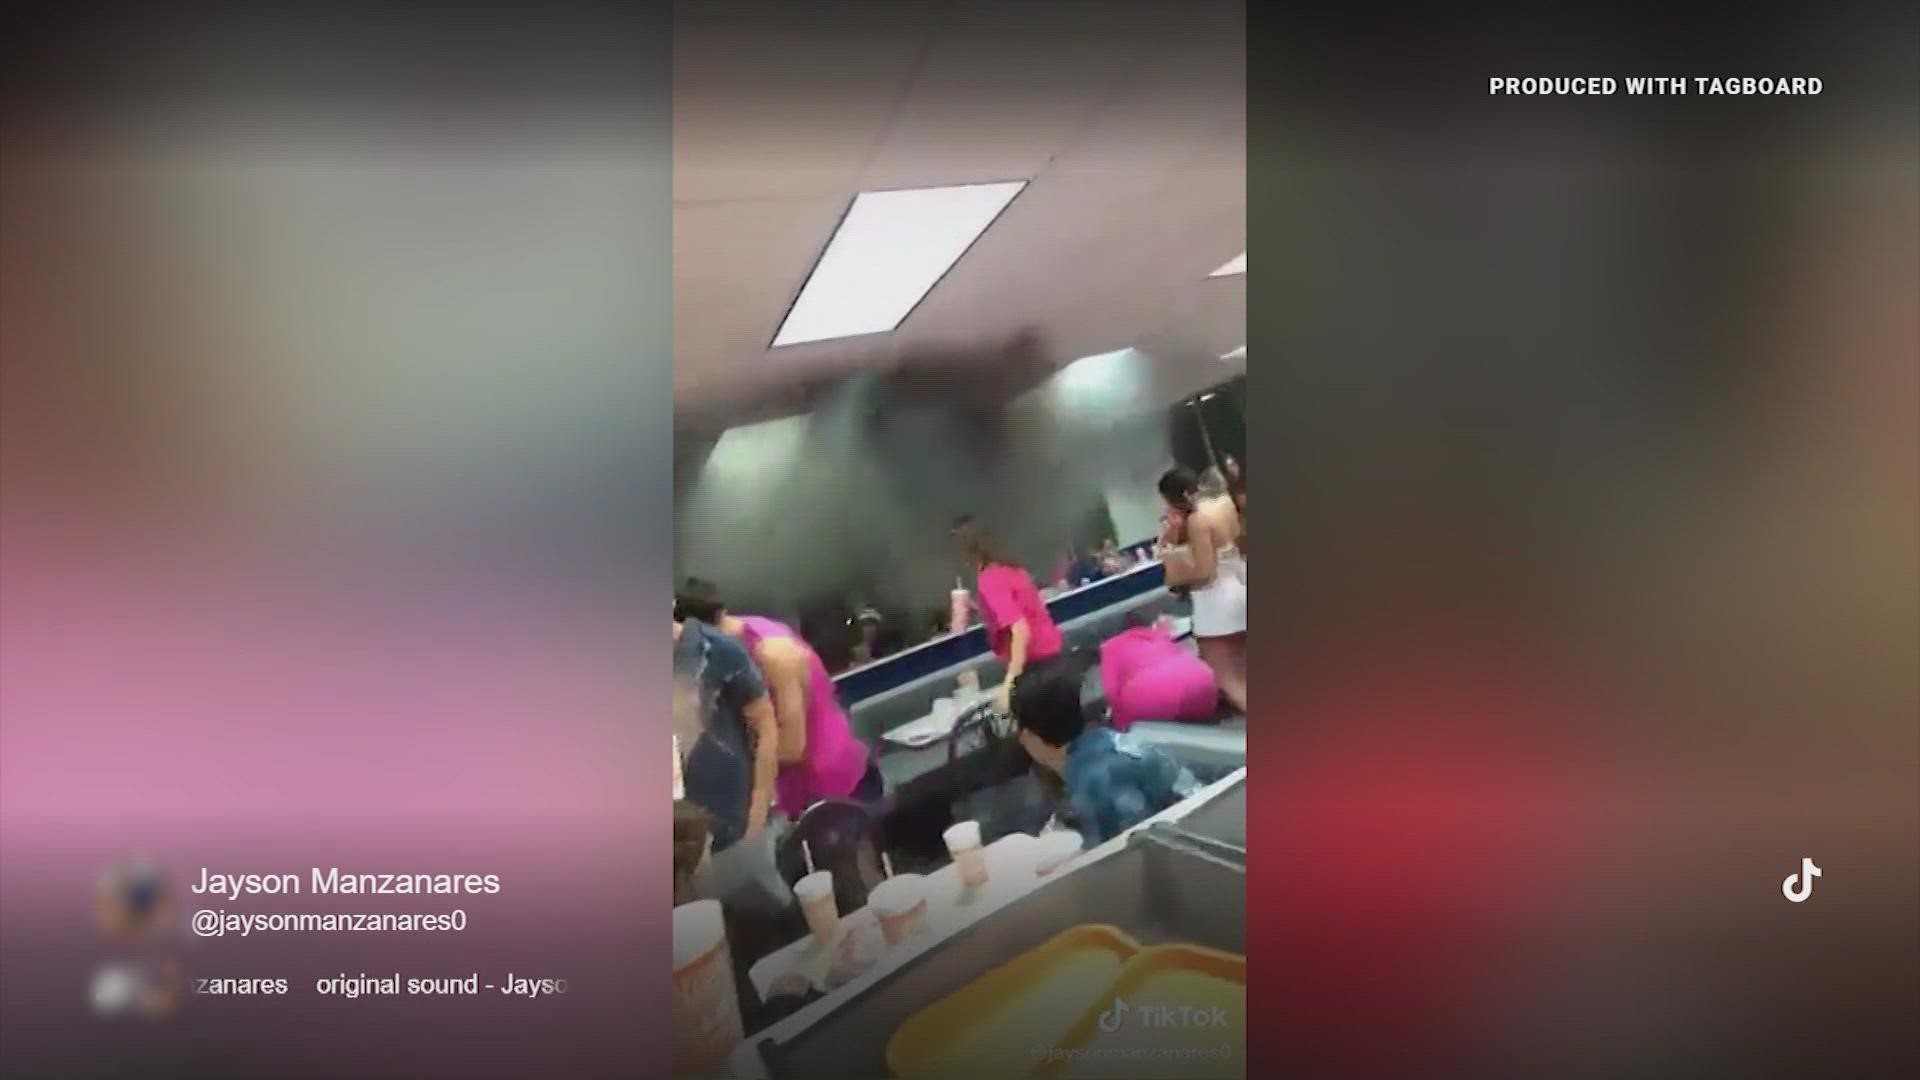 It's unclear exactly where it was taken, but the video was posted to TikTok with the caption "Only in Texas."